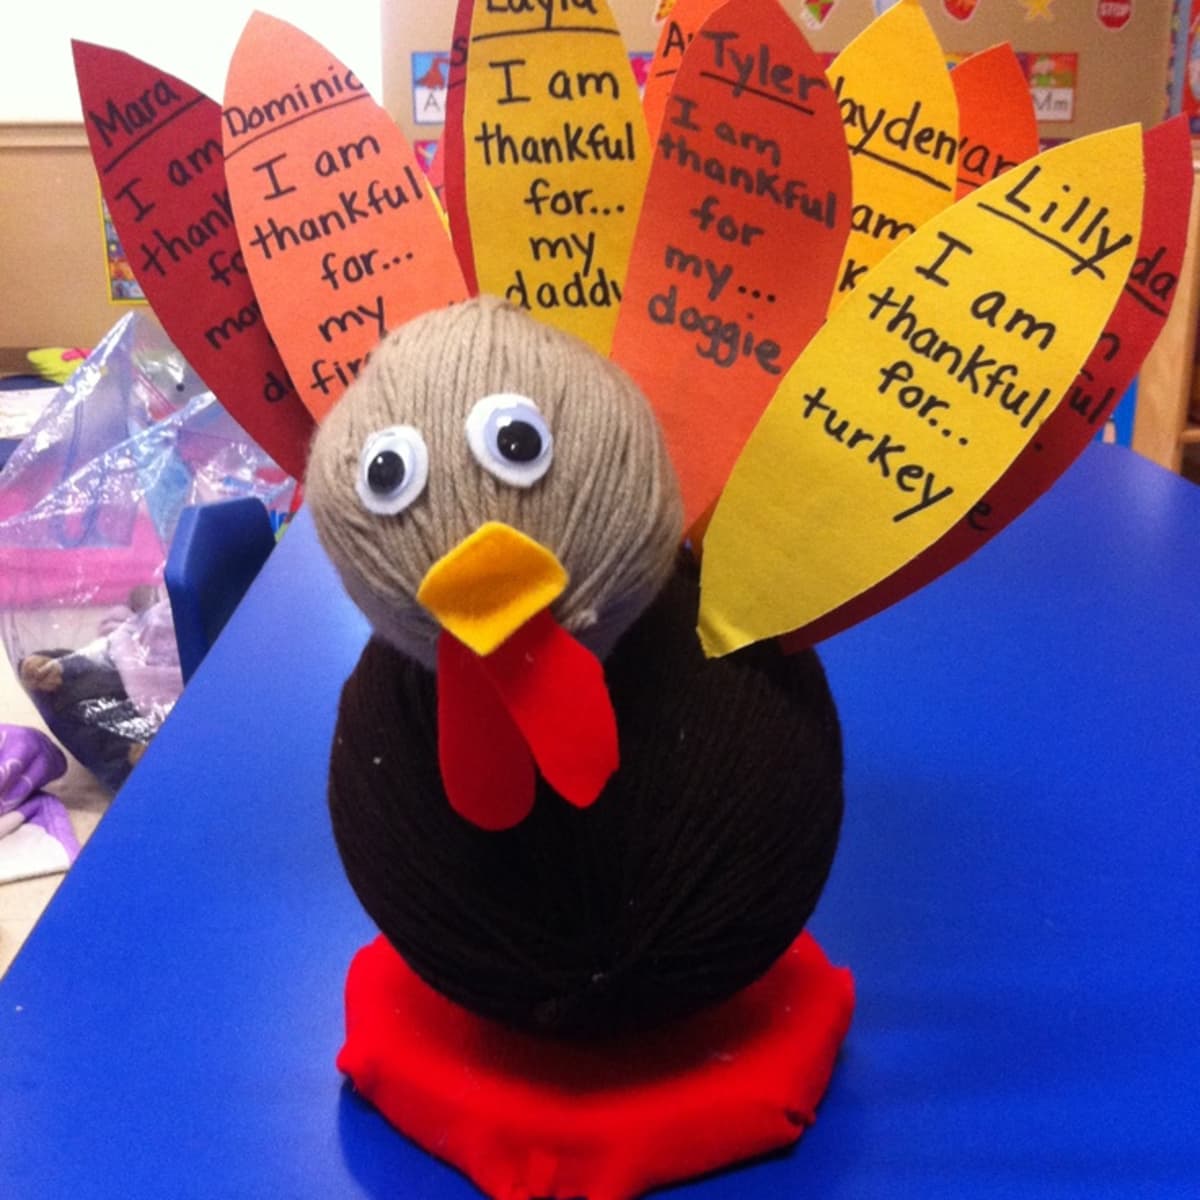 3 Easy Turkey Thanksgiving Crafts for Toddlers